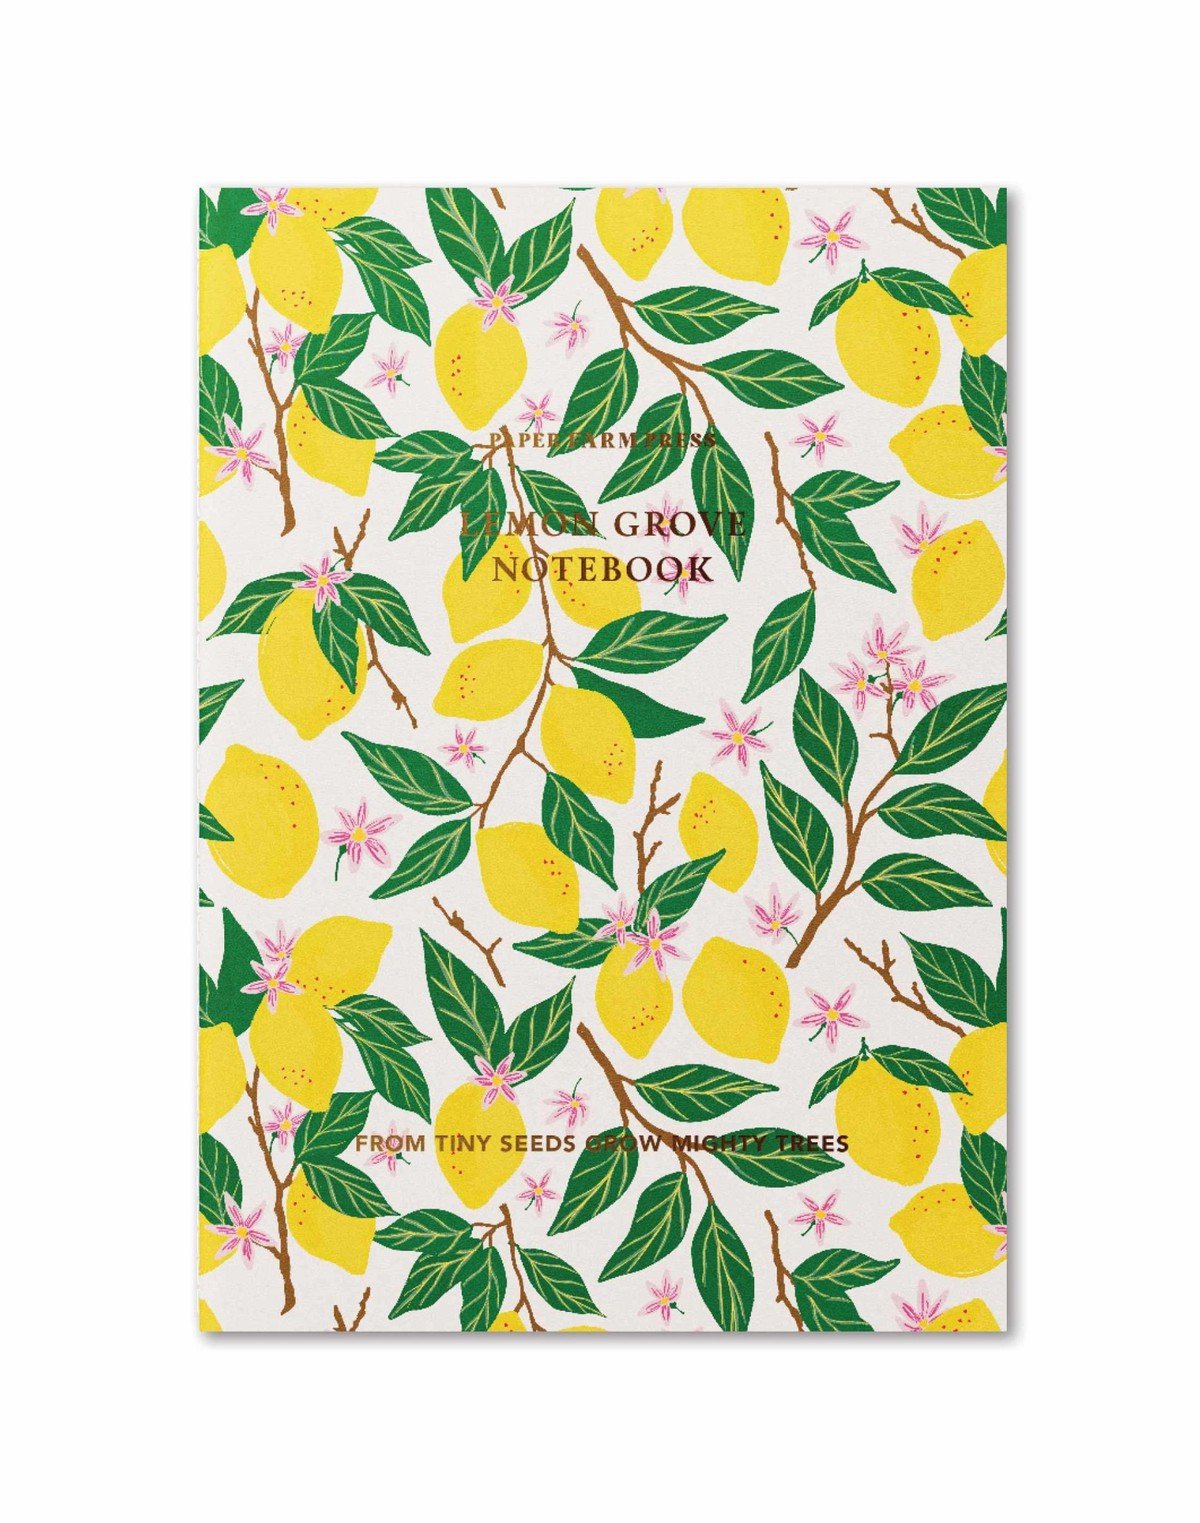 From Tiny Seeds Lemon Grove Stitched Notebook item